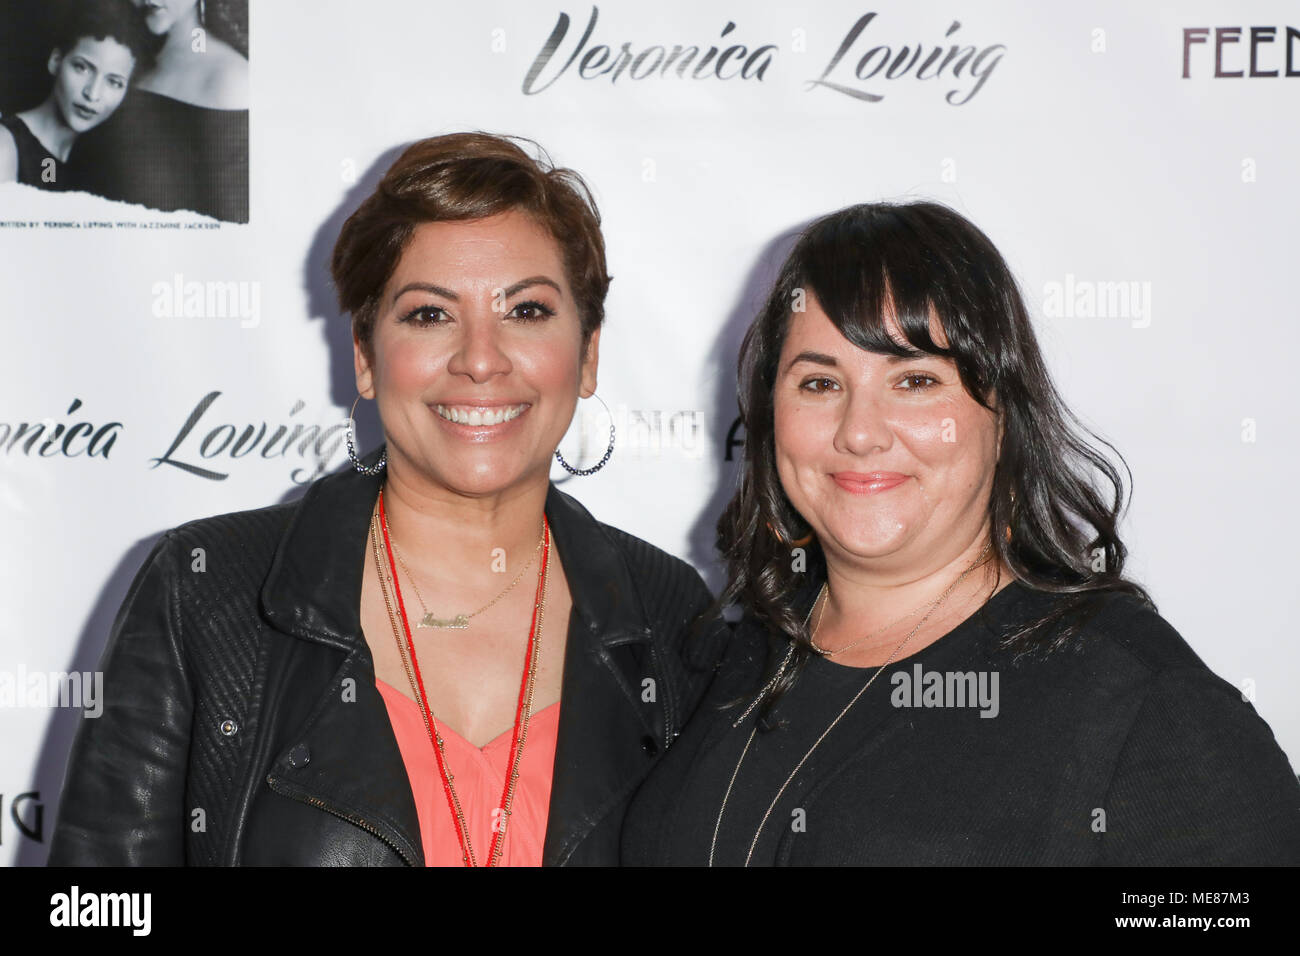 Los Angeles, California, USA. 20th April, 2018. Annette Mata and Felicia Grigsby attending the Premiere of 'Feeding a Monster' Stage Play held at the Hudson Theatre in Los Angeles, California on April 20th, 2018.  Credit: Sheri Determan/Alamy Live News Stock Photo